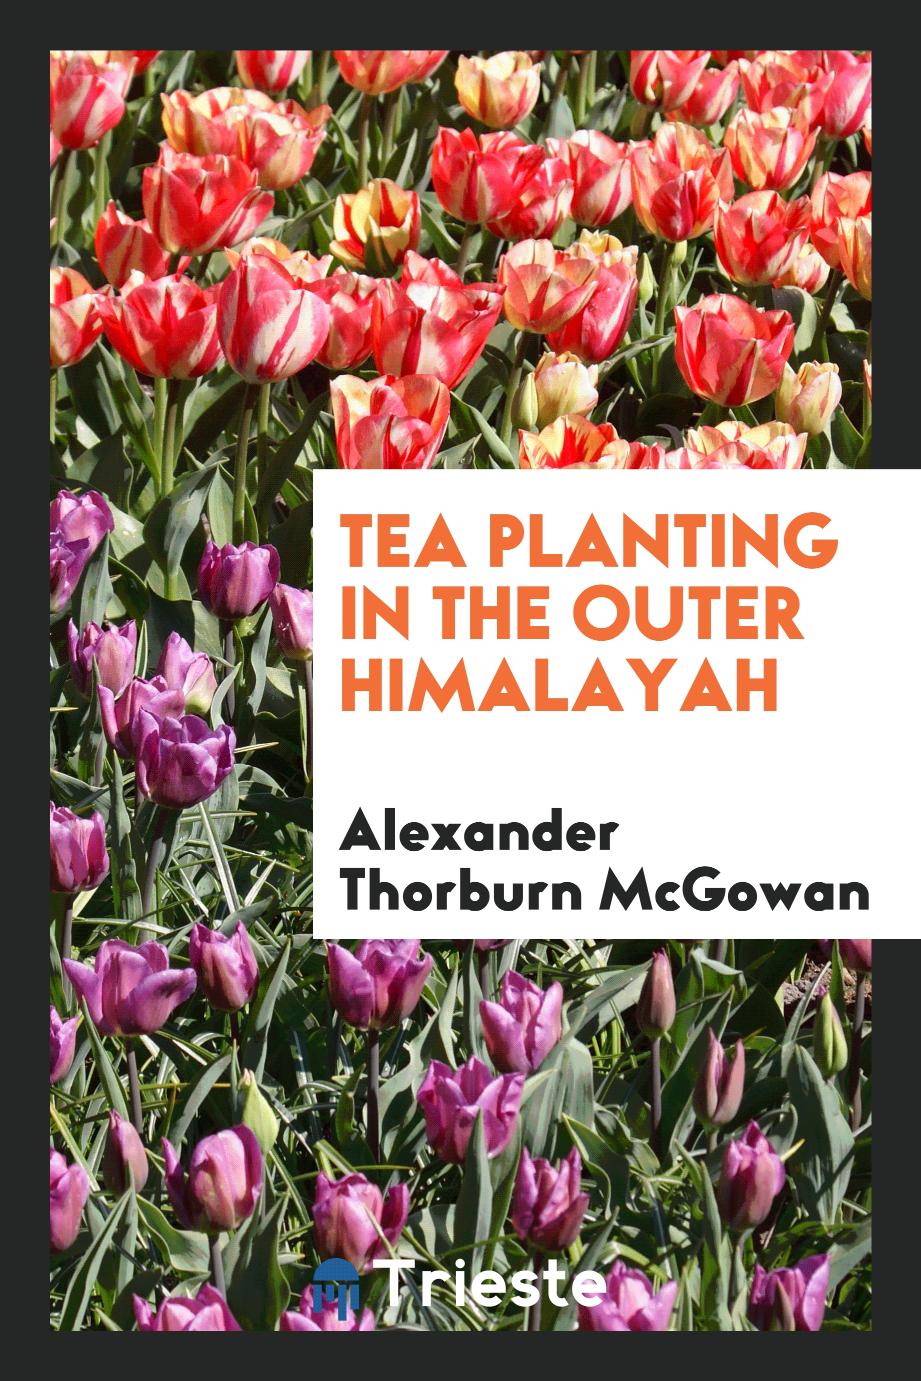 Tea planting in the outer Himalayah